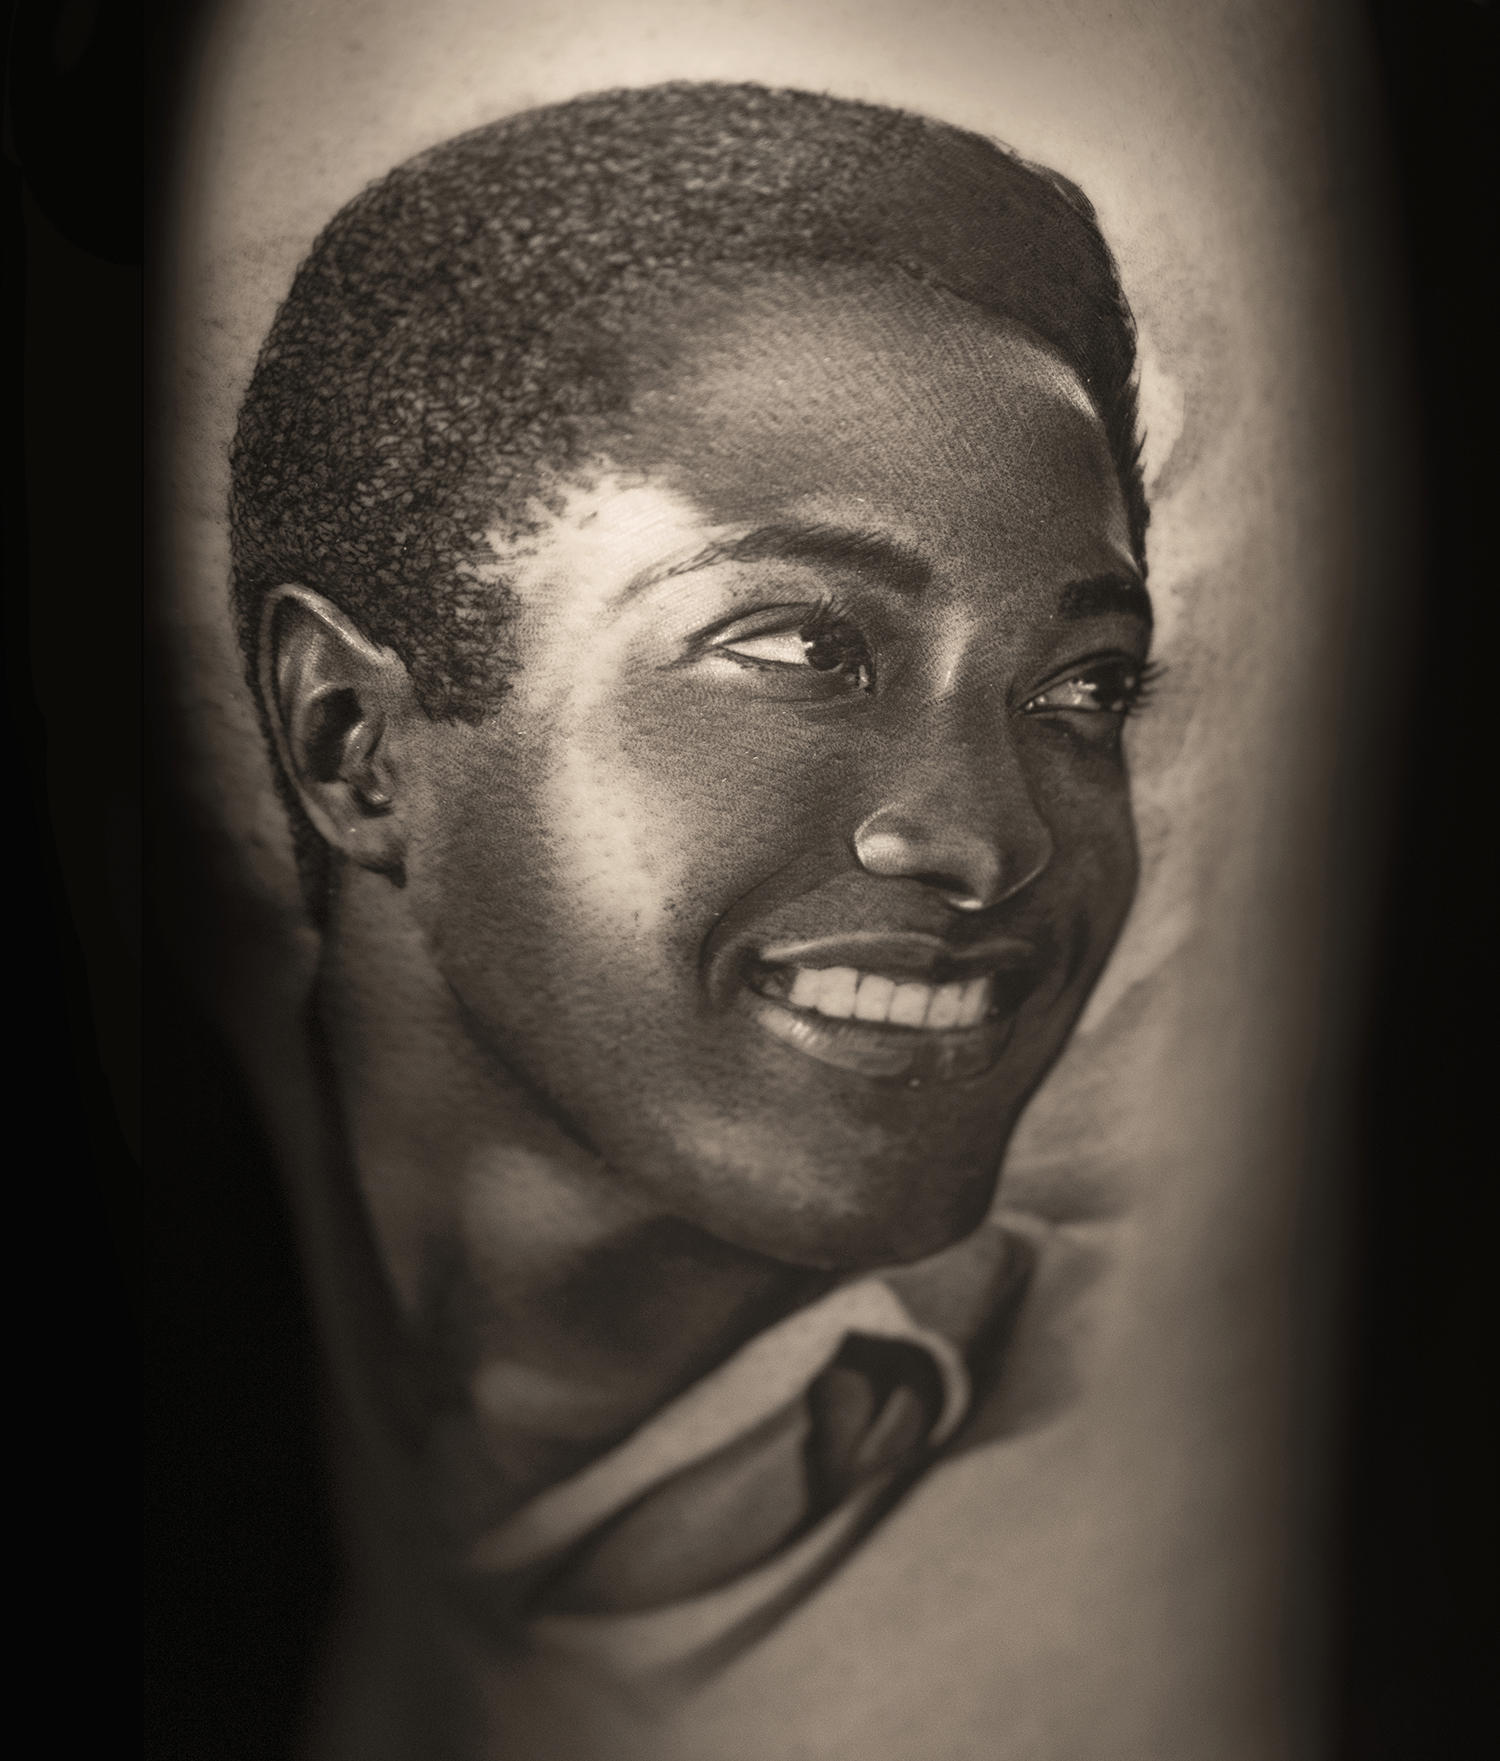 Tattoo of Sam Cooke, American singer, songwriter, civil-rights activist. Tattoo by Denis tdan tidan